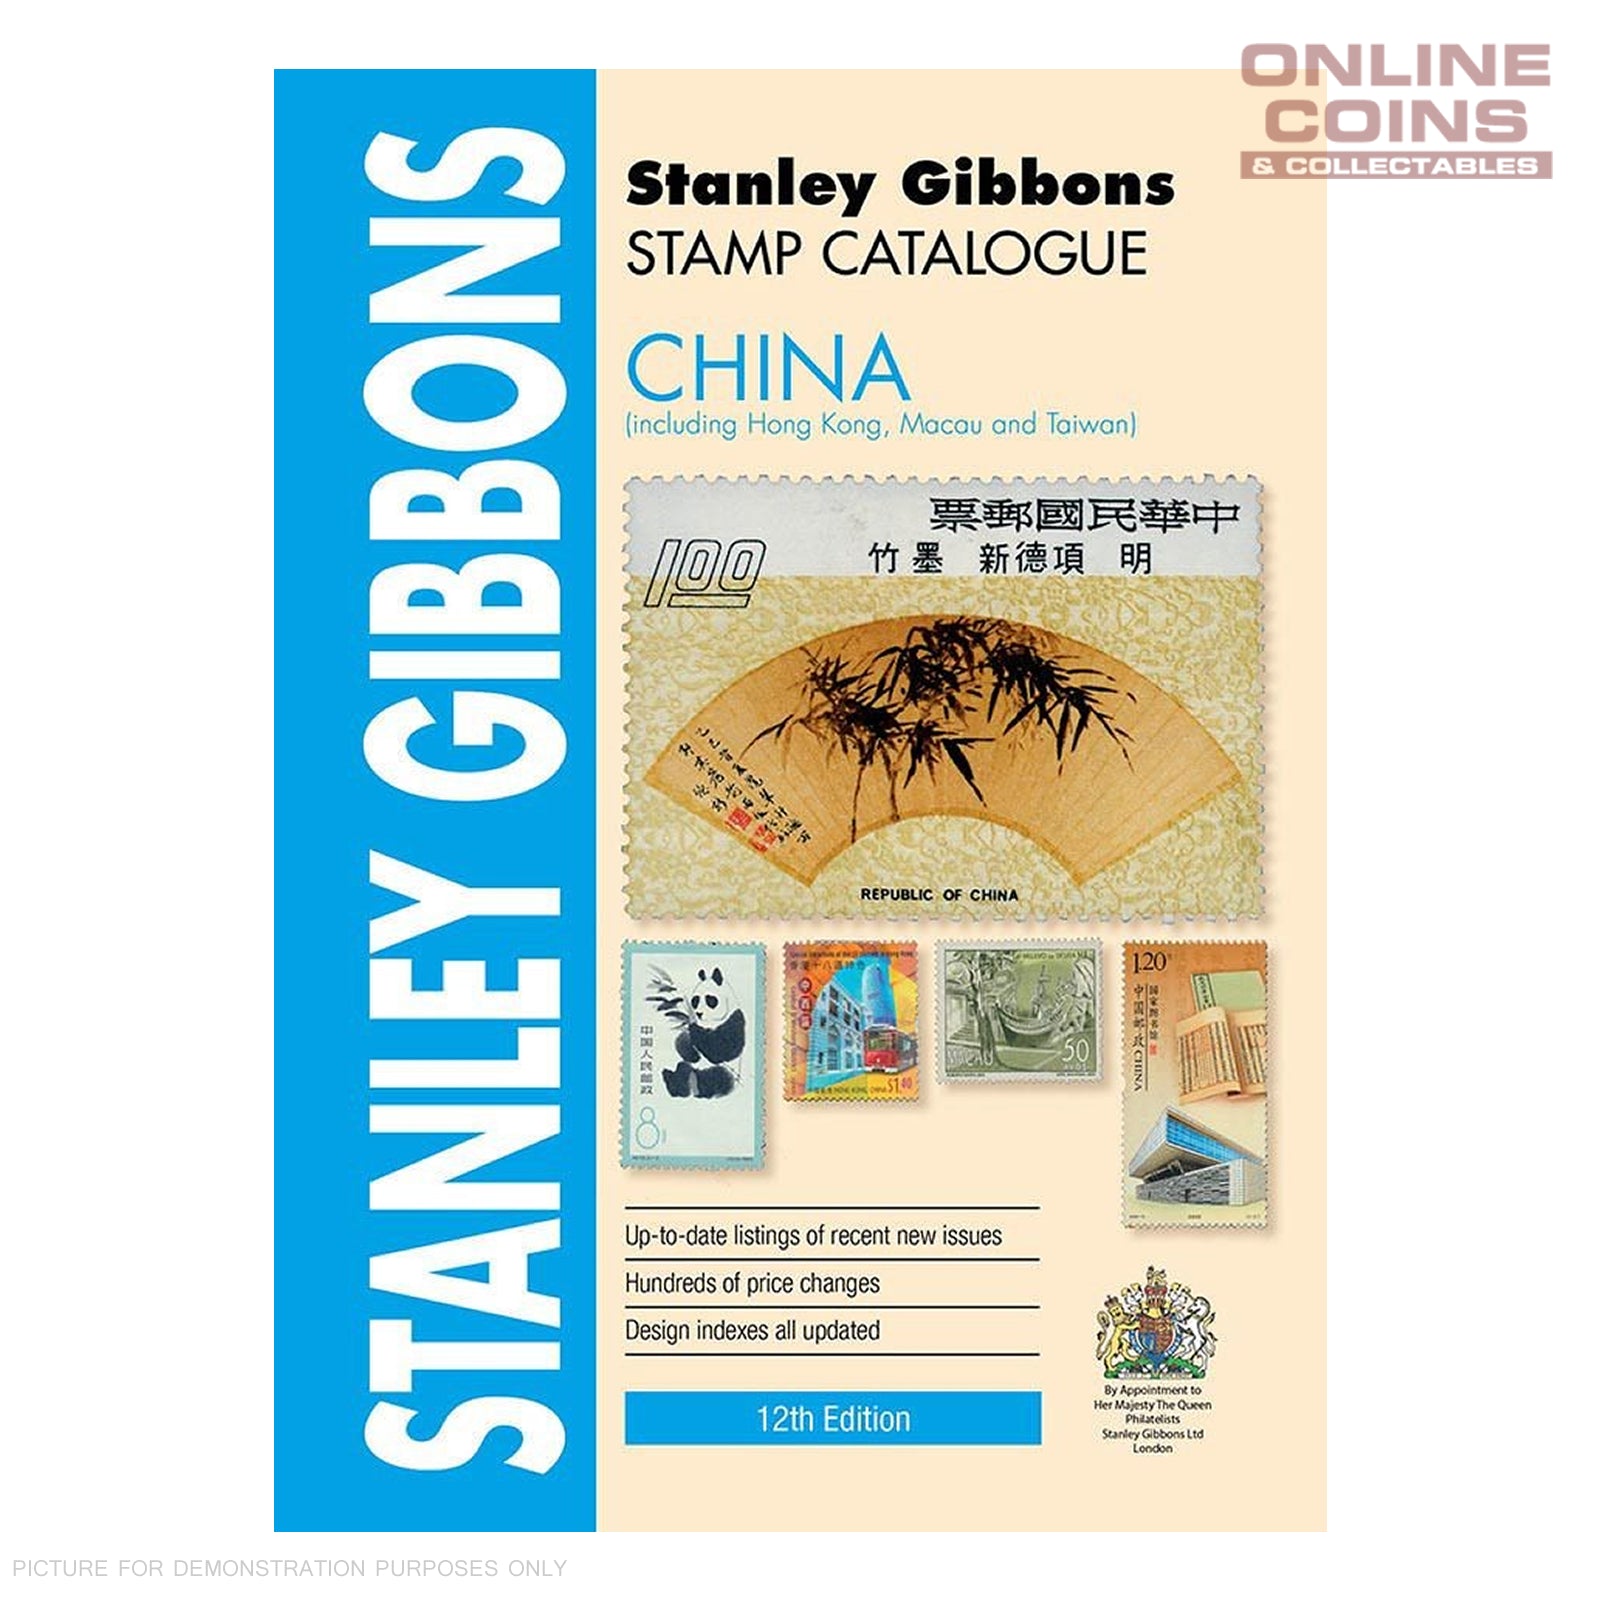 2018 Stanley Gibbons CHINA Stamp Catalogue Part17 - 12th Edition Soft Cover Book